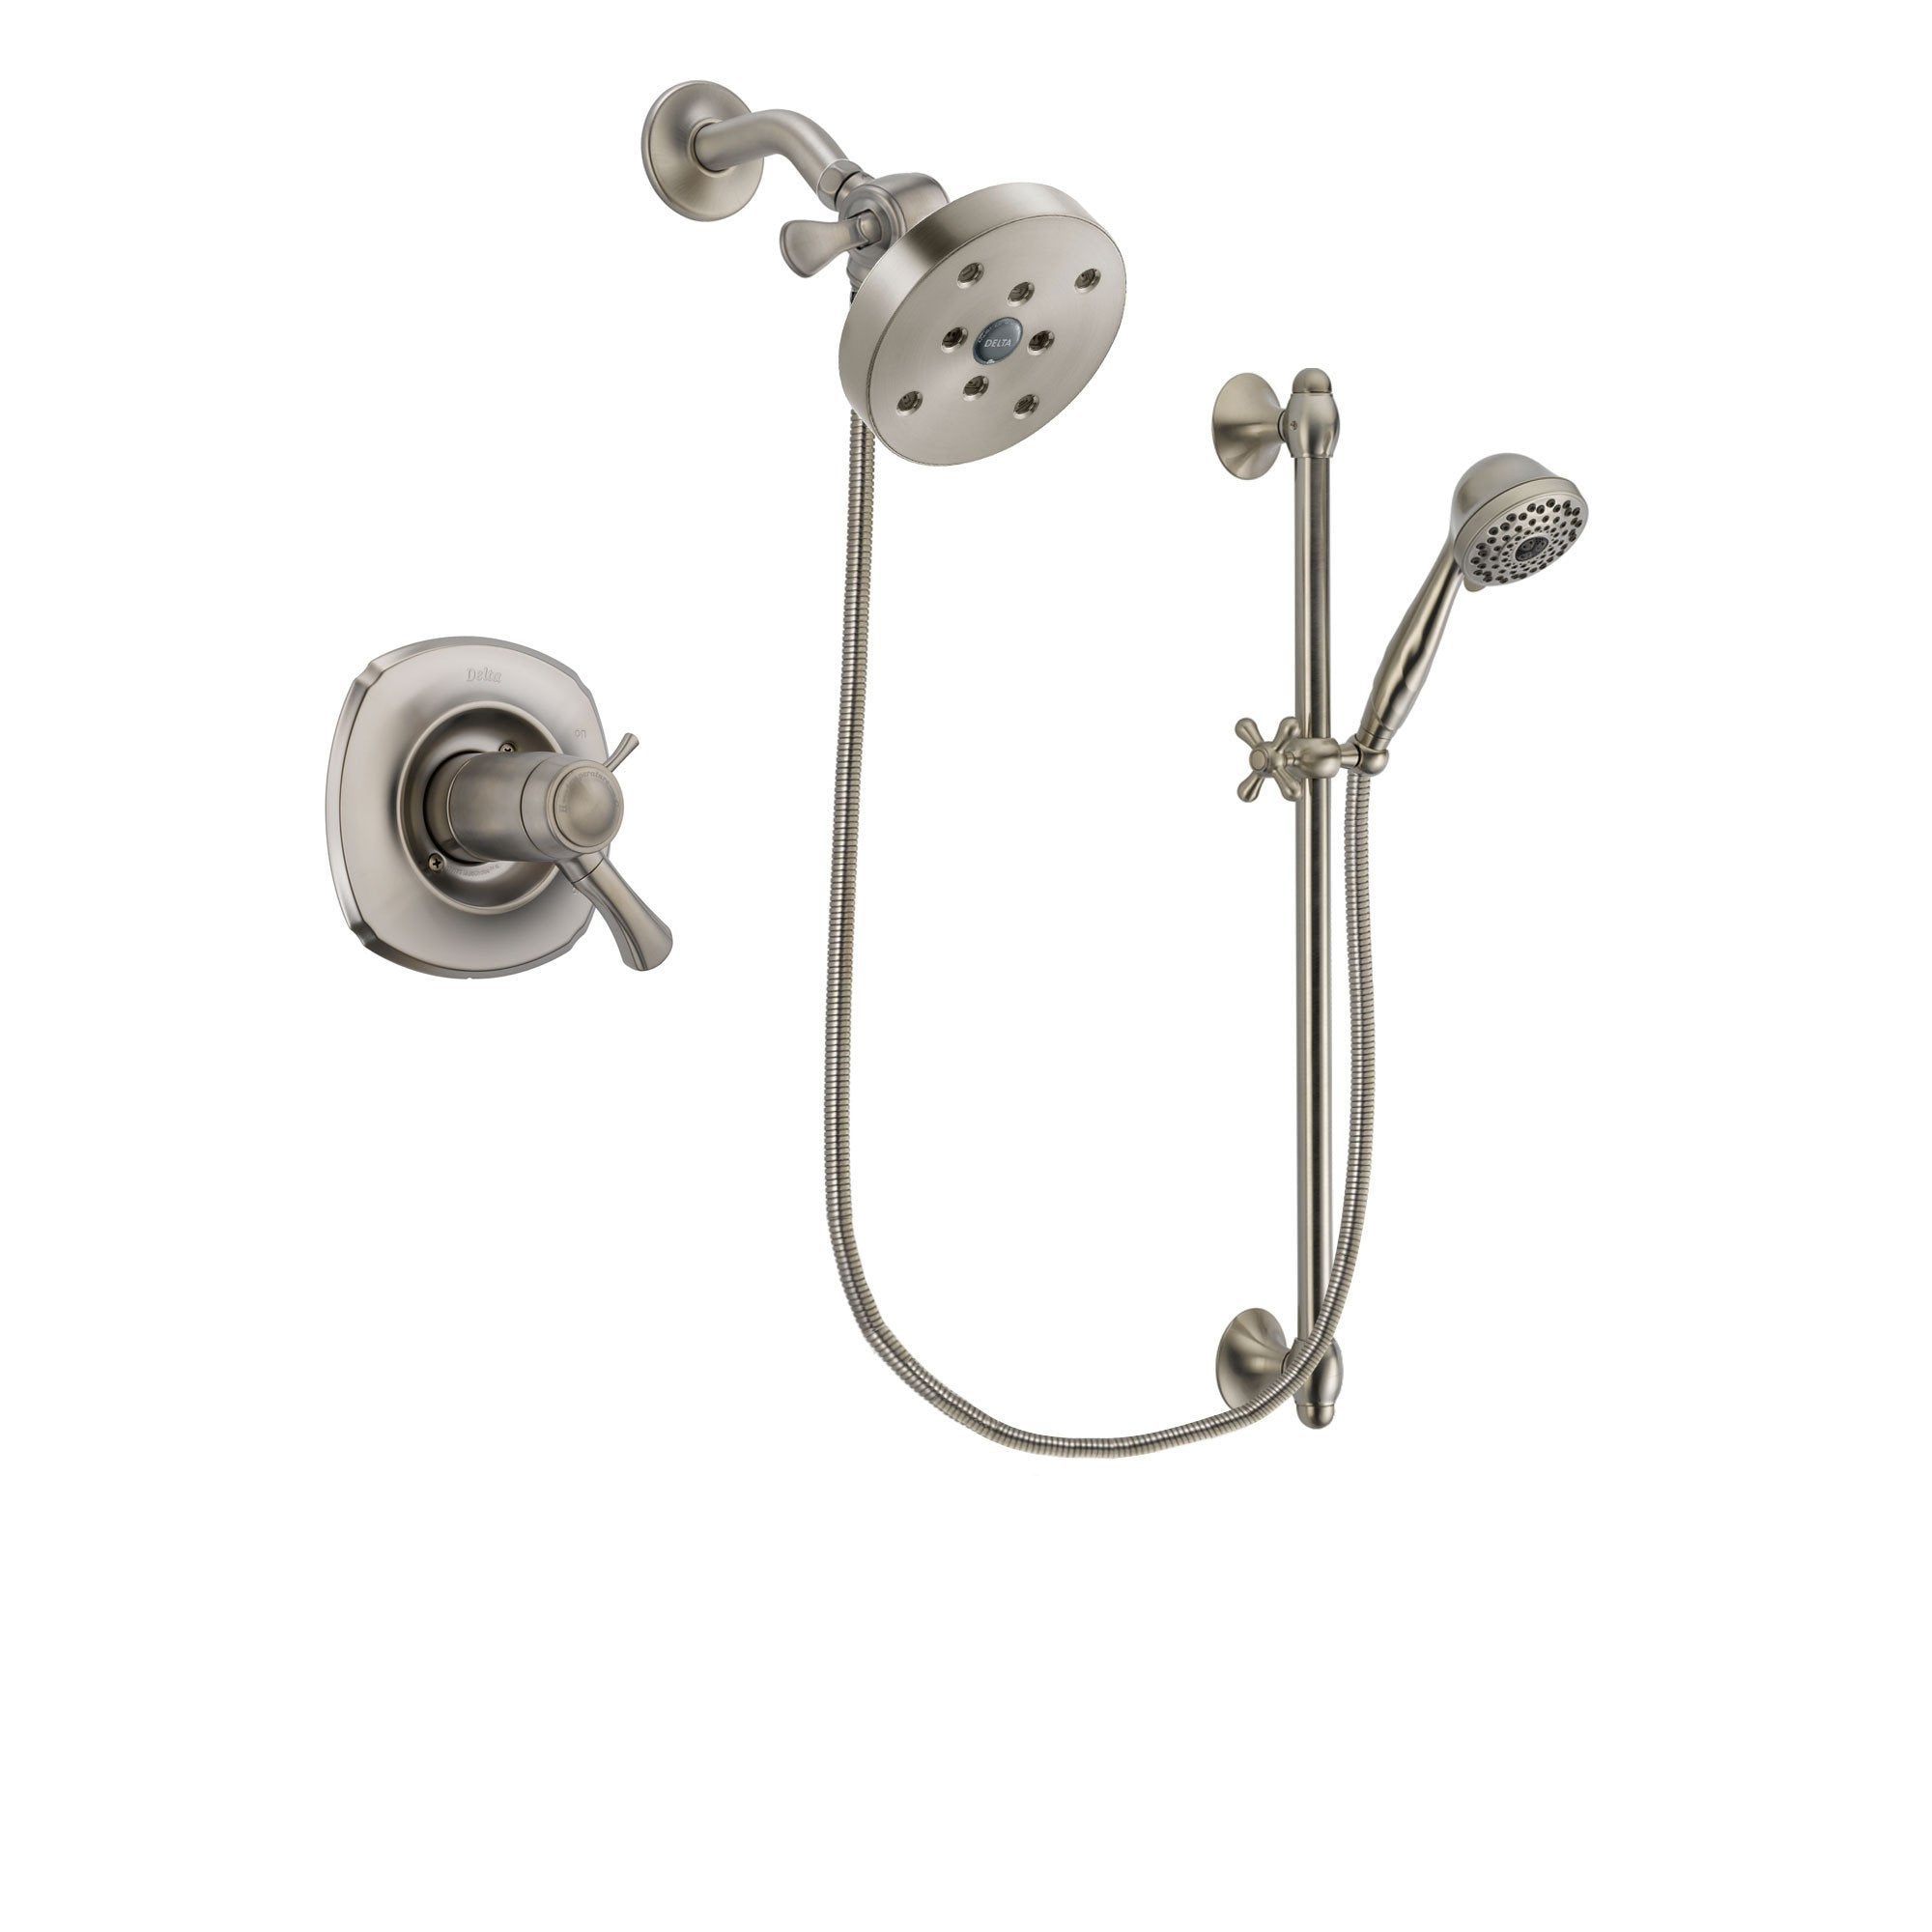 Delta Addison Stainless Steel Finish Thermostatic Shower Faucet System Package with 5-1/2 inch Shower Head and 7-Spray Handheld Shower with Slide Bar Includes Rough-in Valve DSP1758V